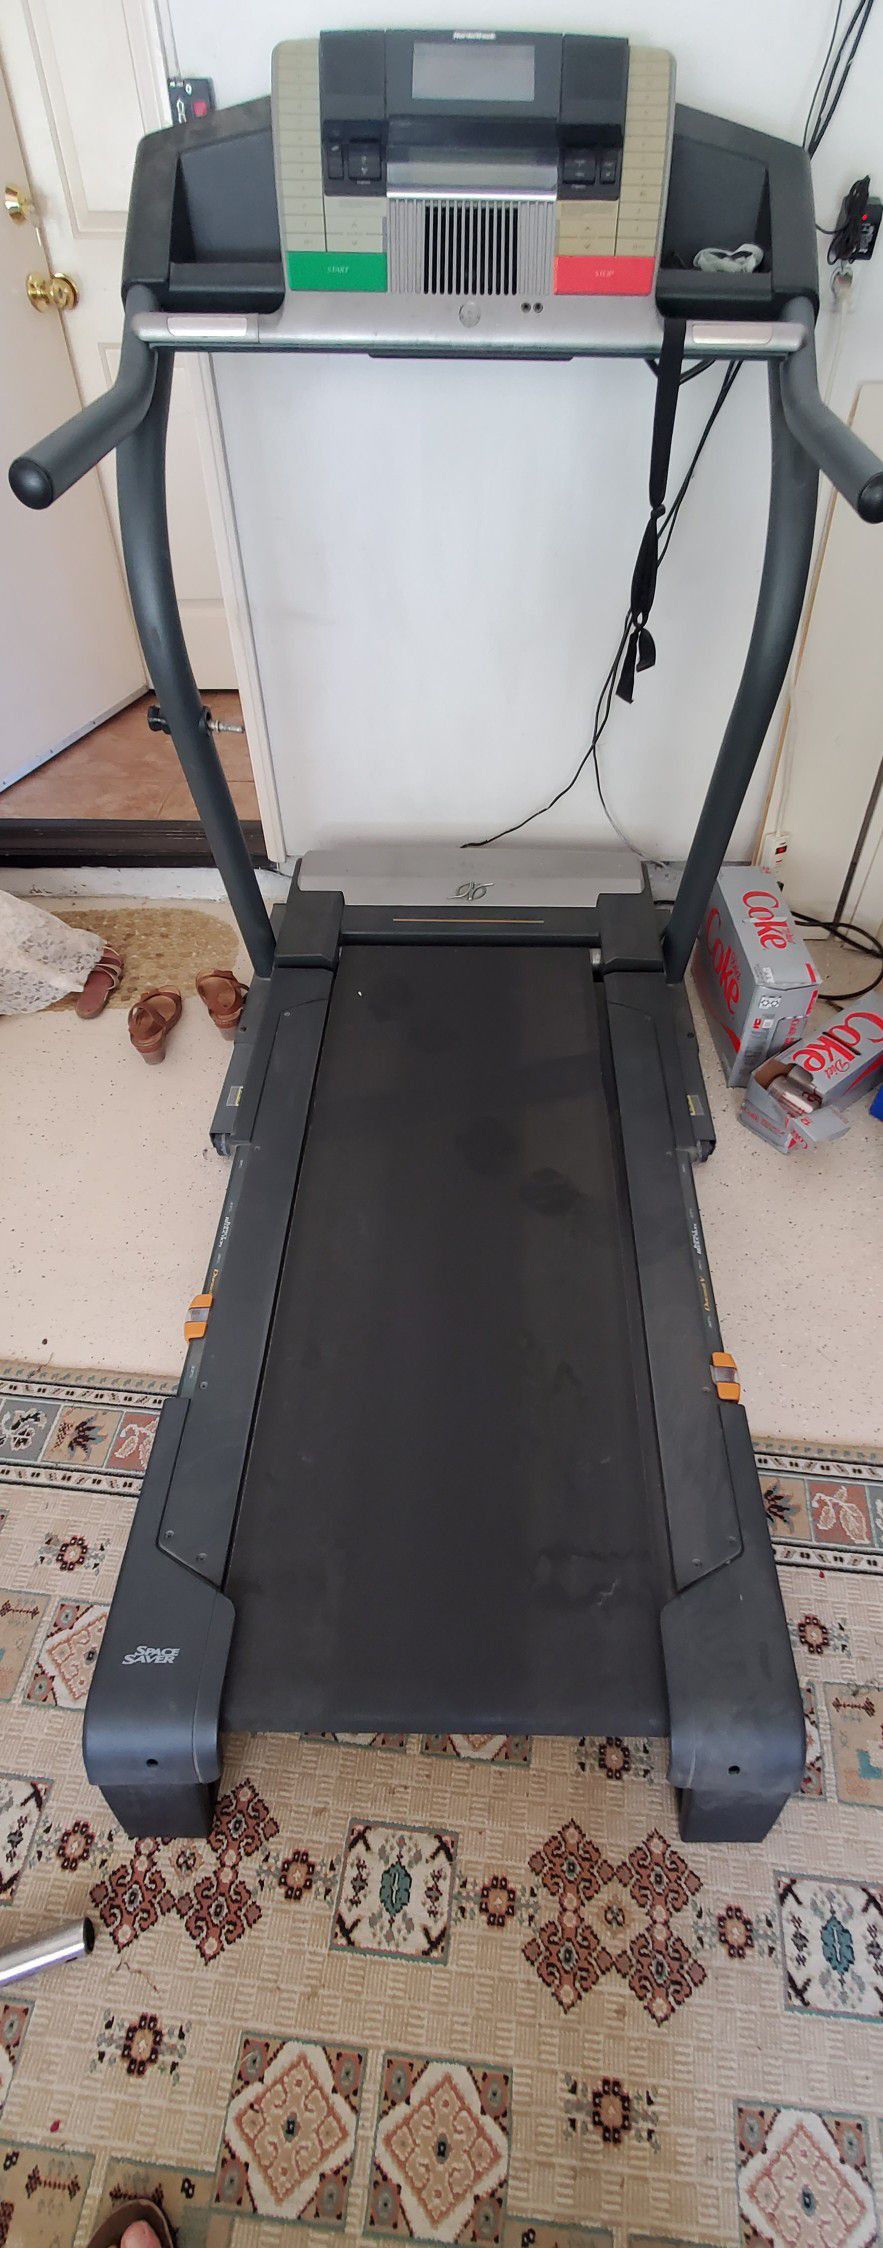 Nordictrack Treadmill With TV 